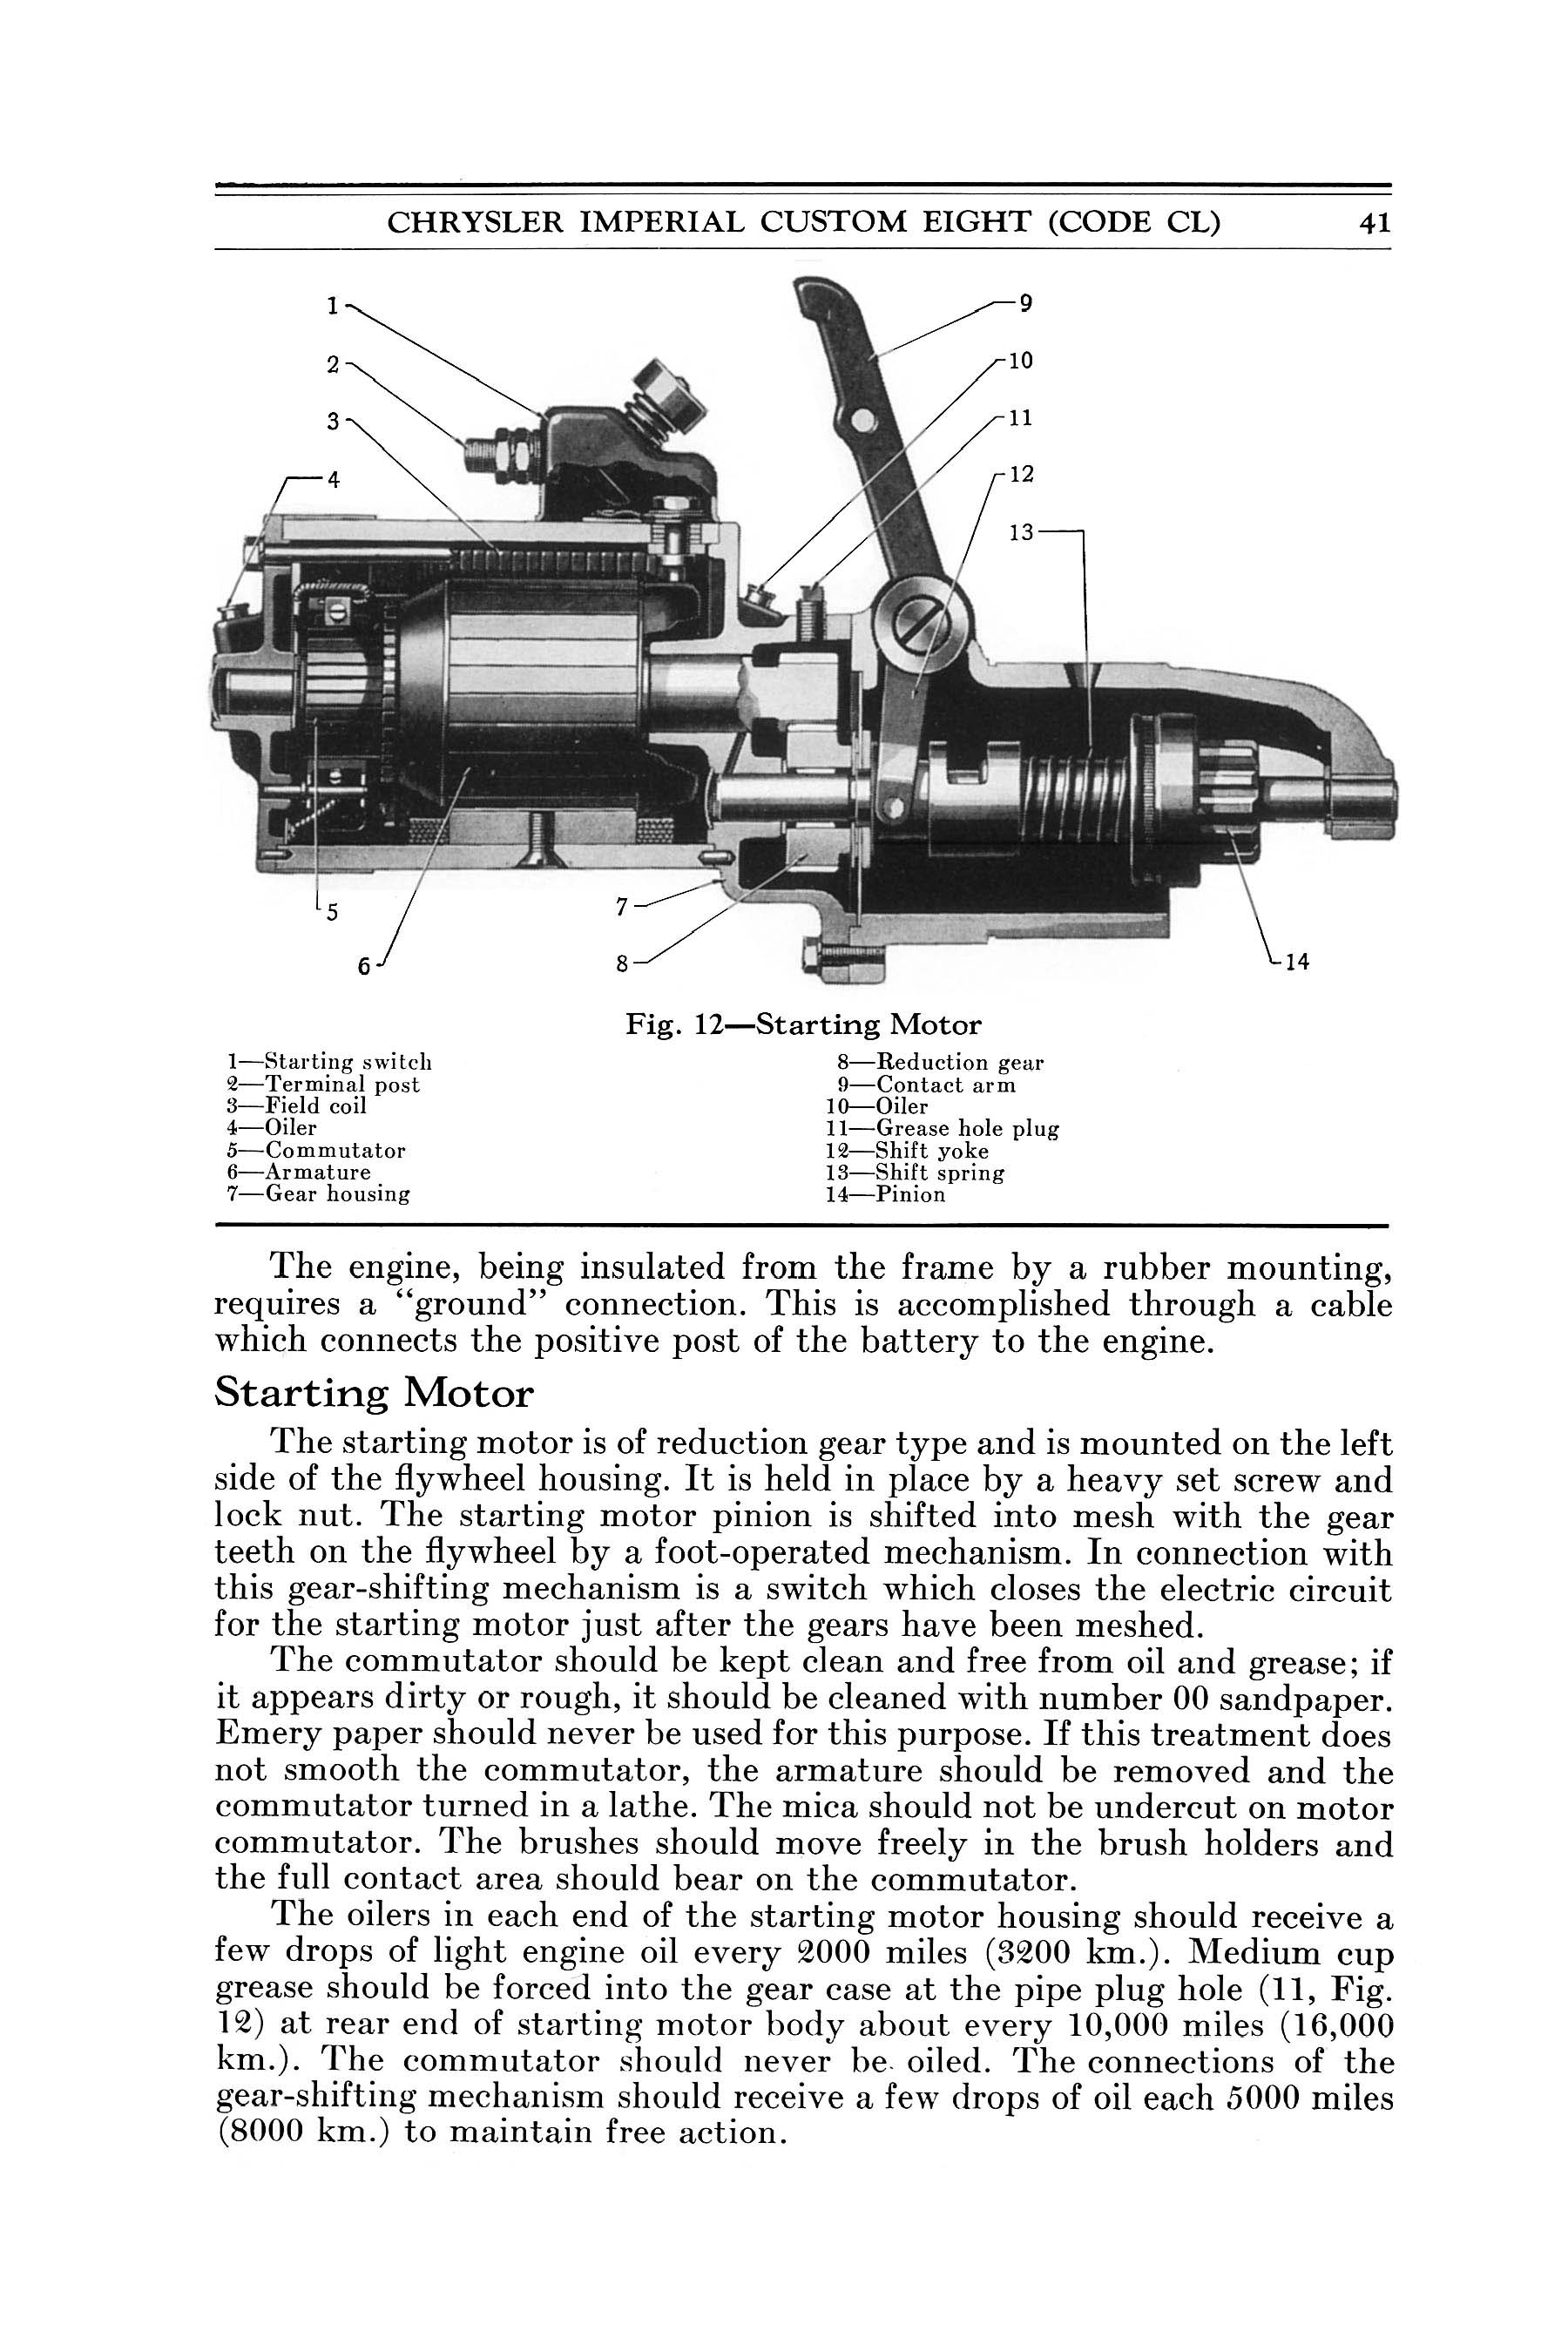 1932 Chrysler Imperial Instruction Book Page 14